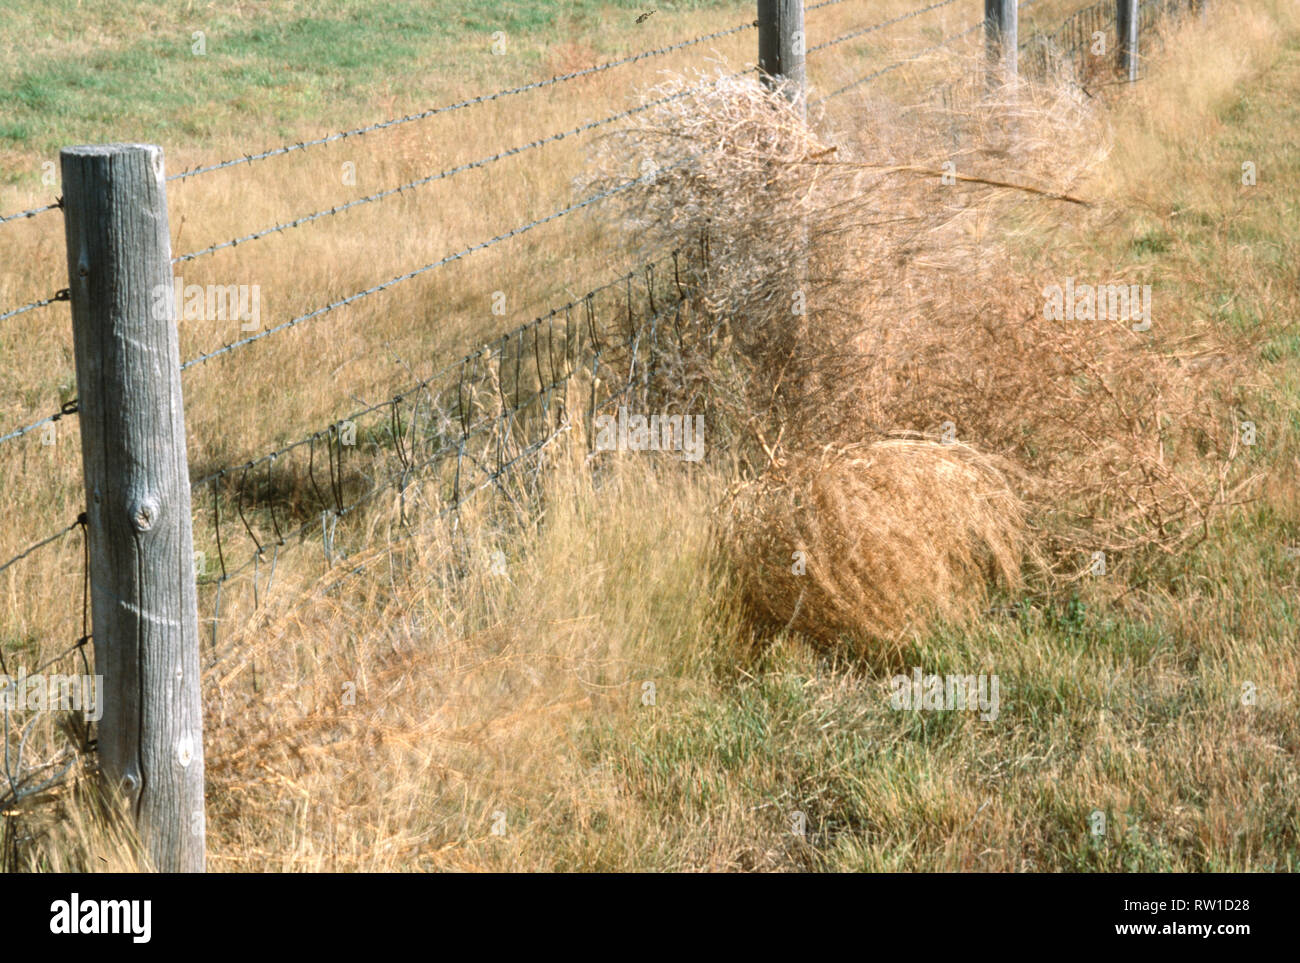 Tumbleweed is common sight out west, WY, USA Stock Photo